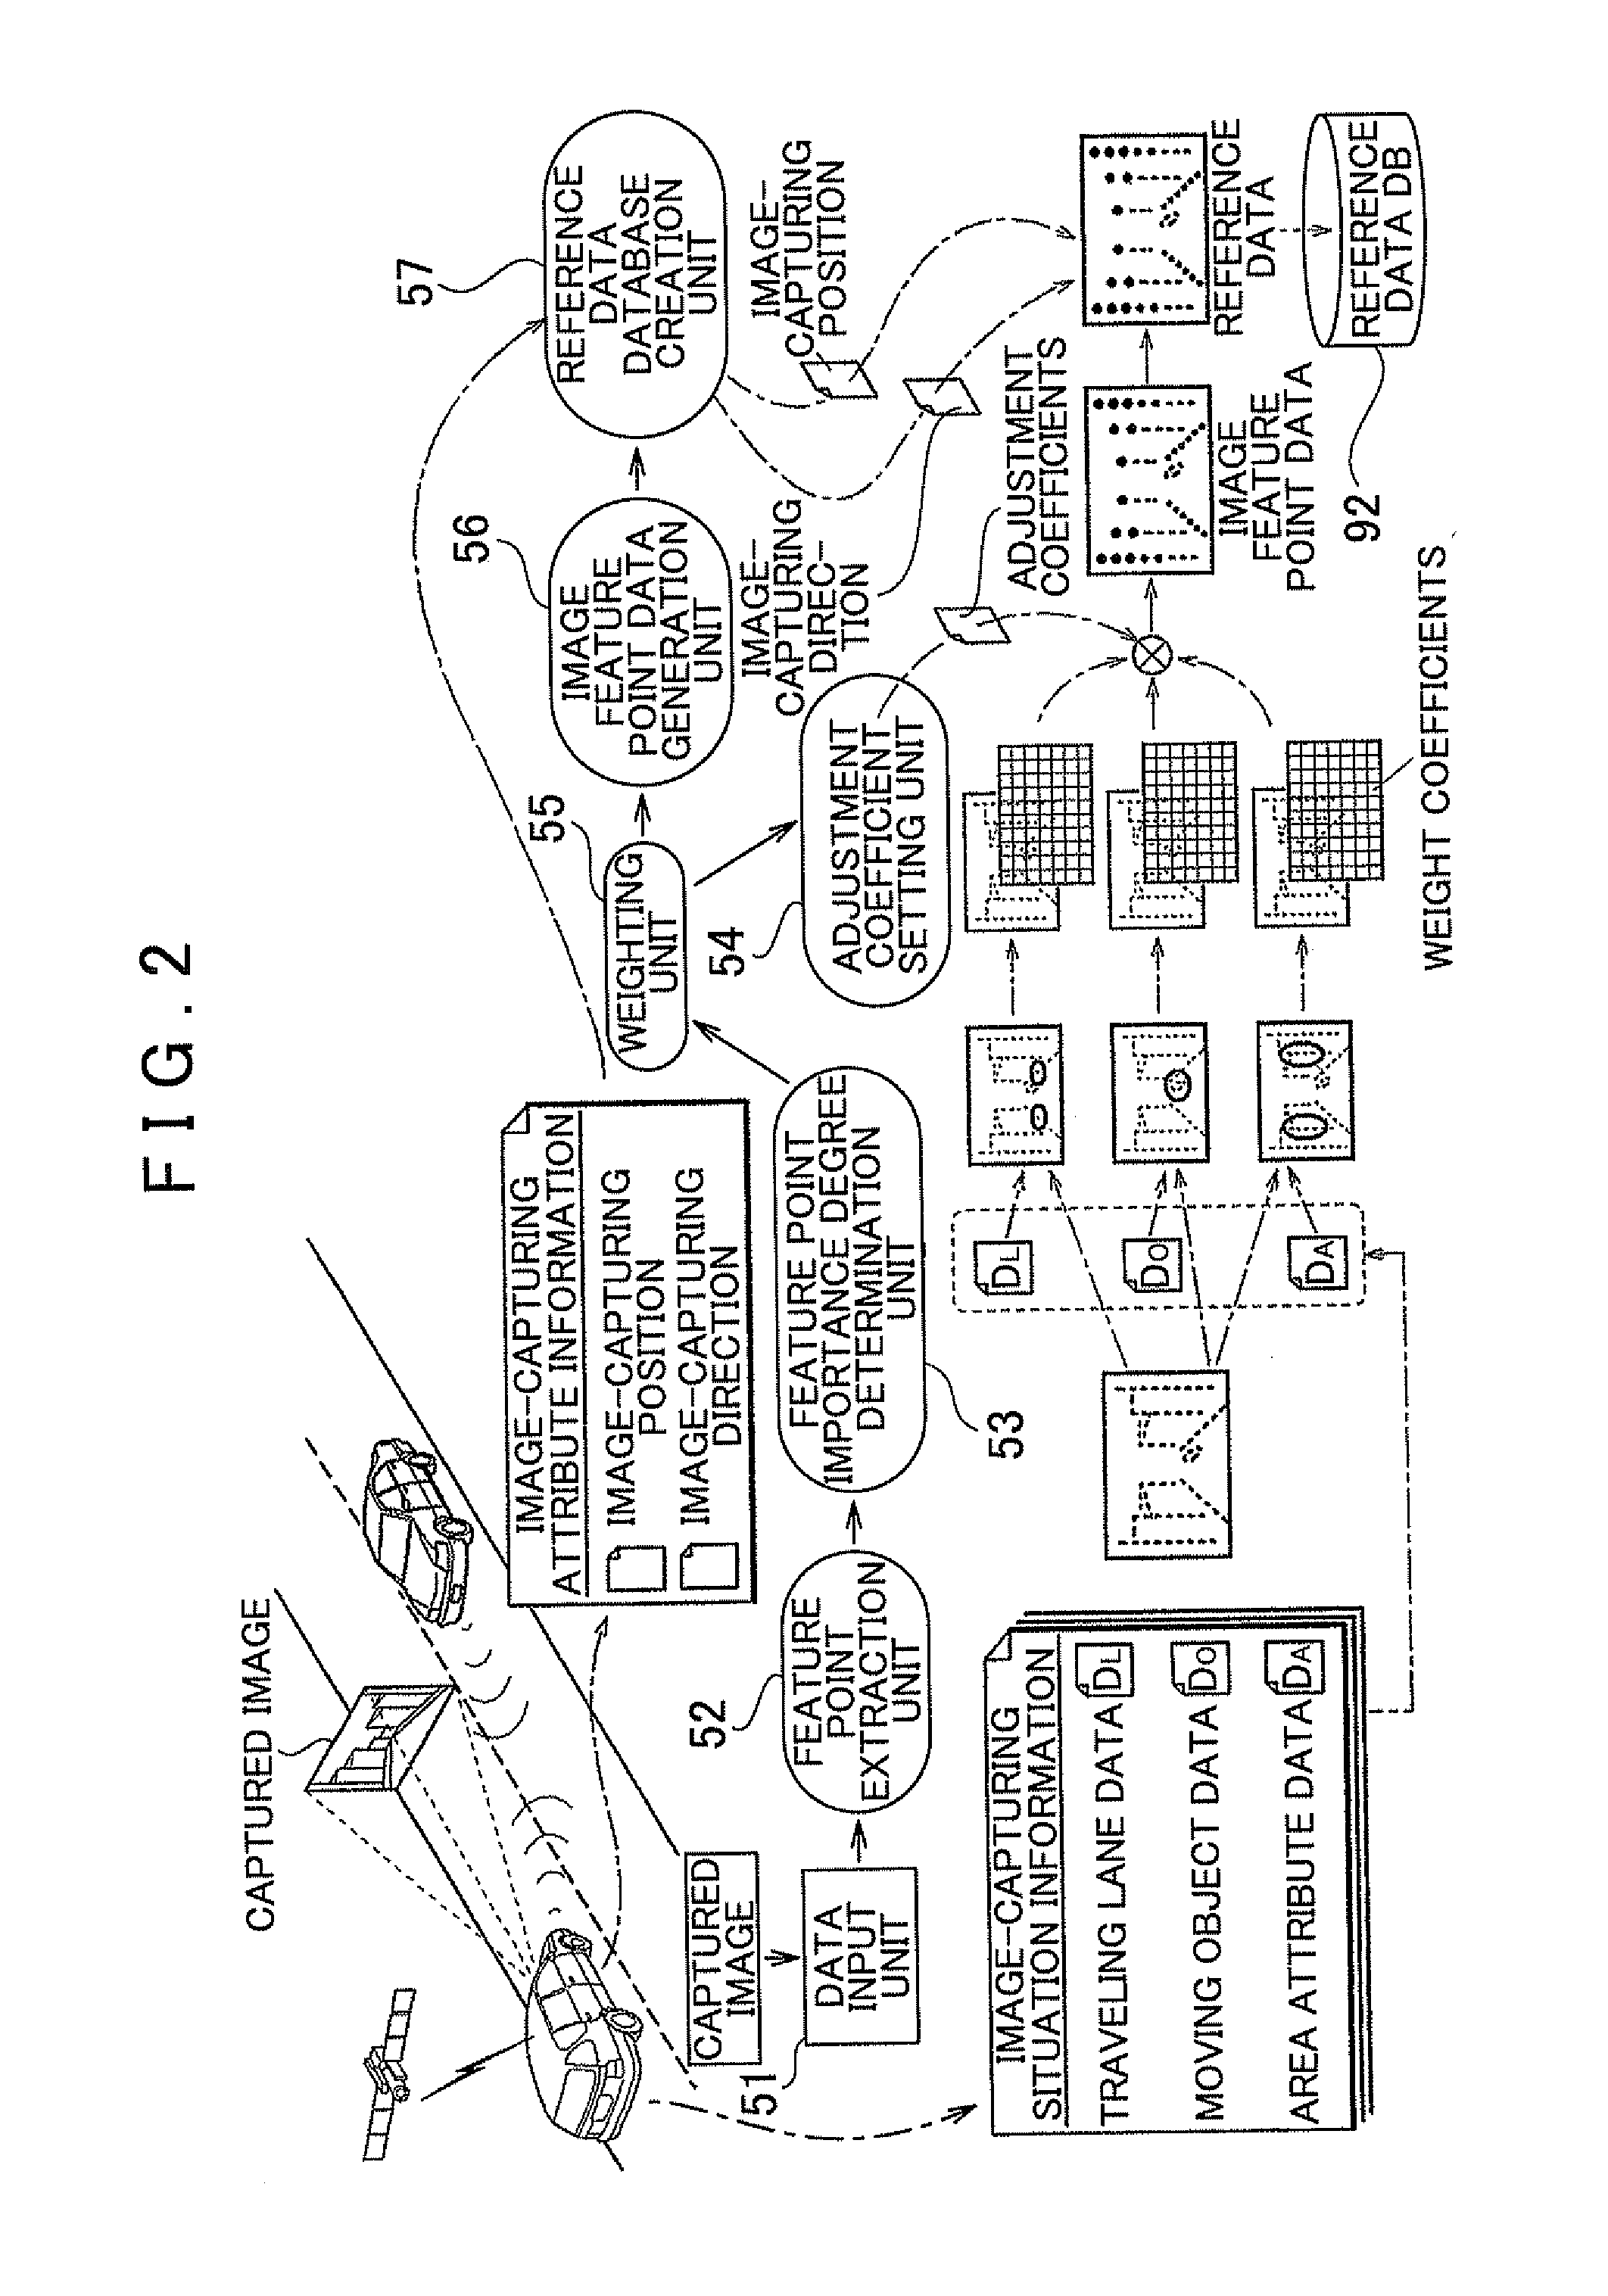 Vehicle position recognition system